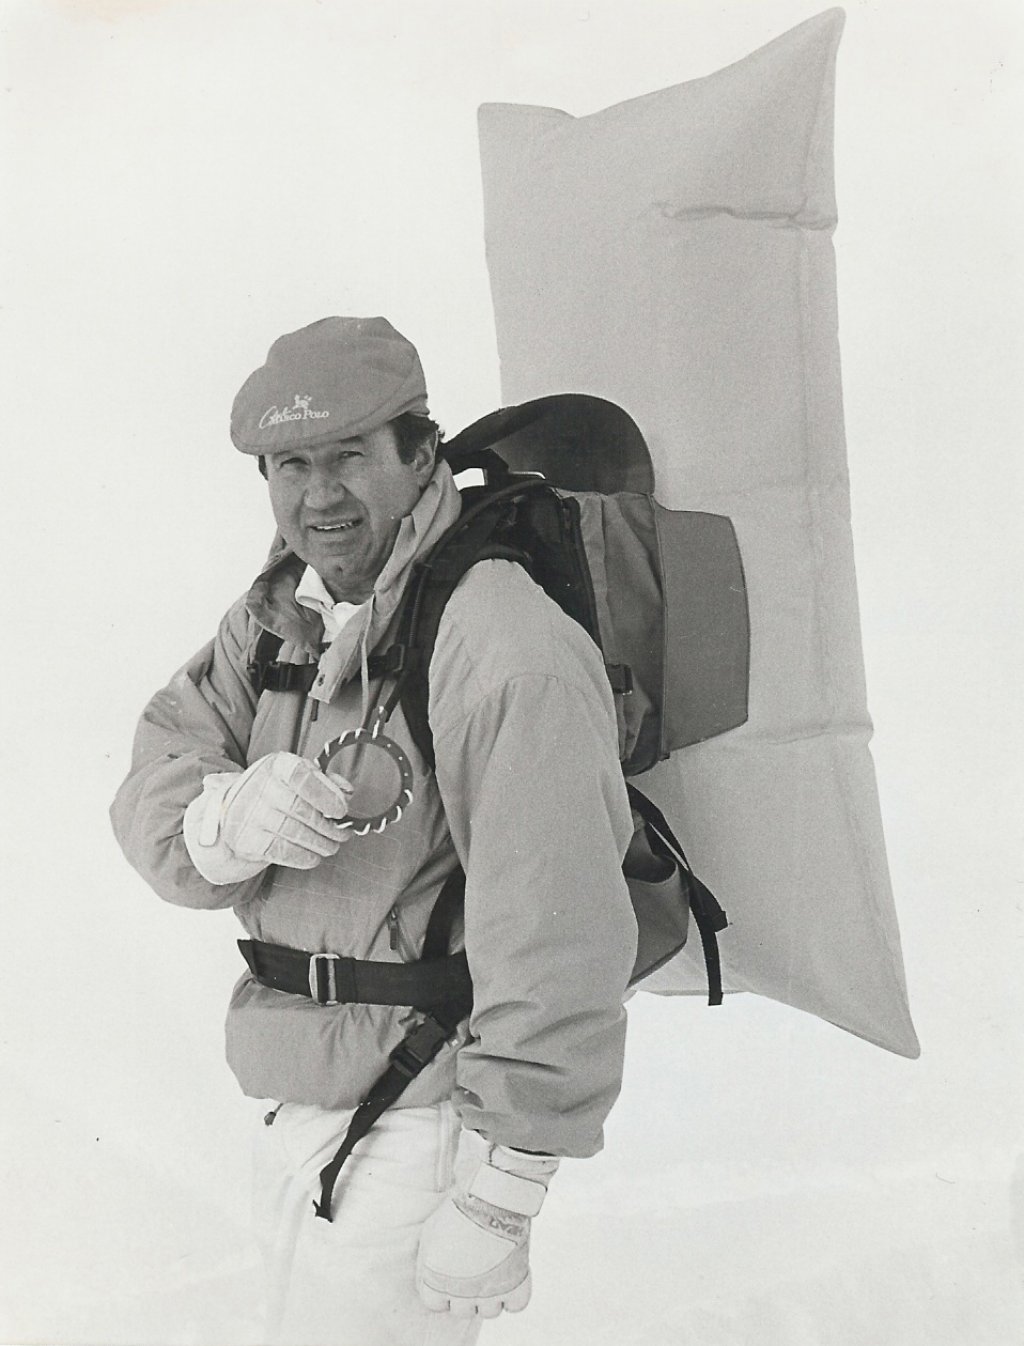 Peter Aschauer with the first ABS backpack